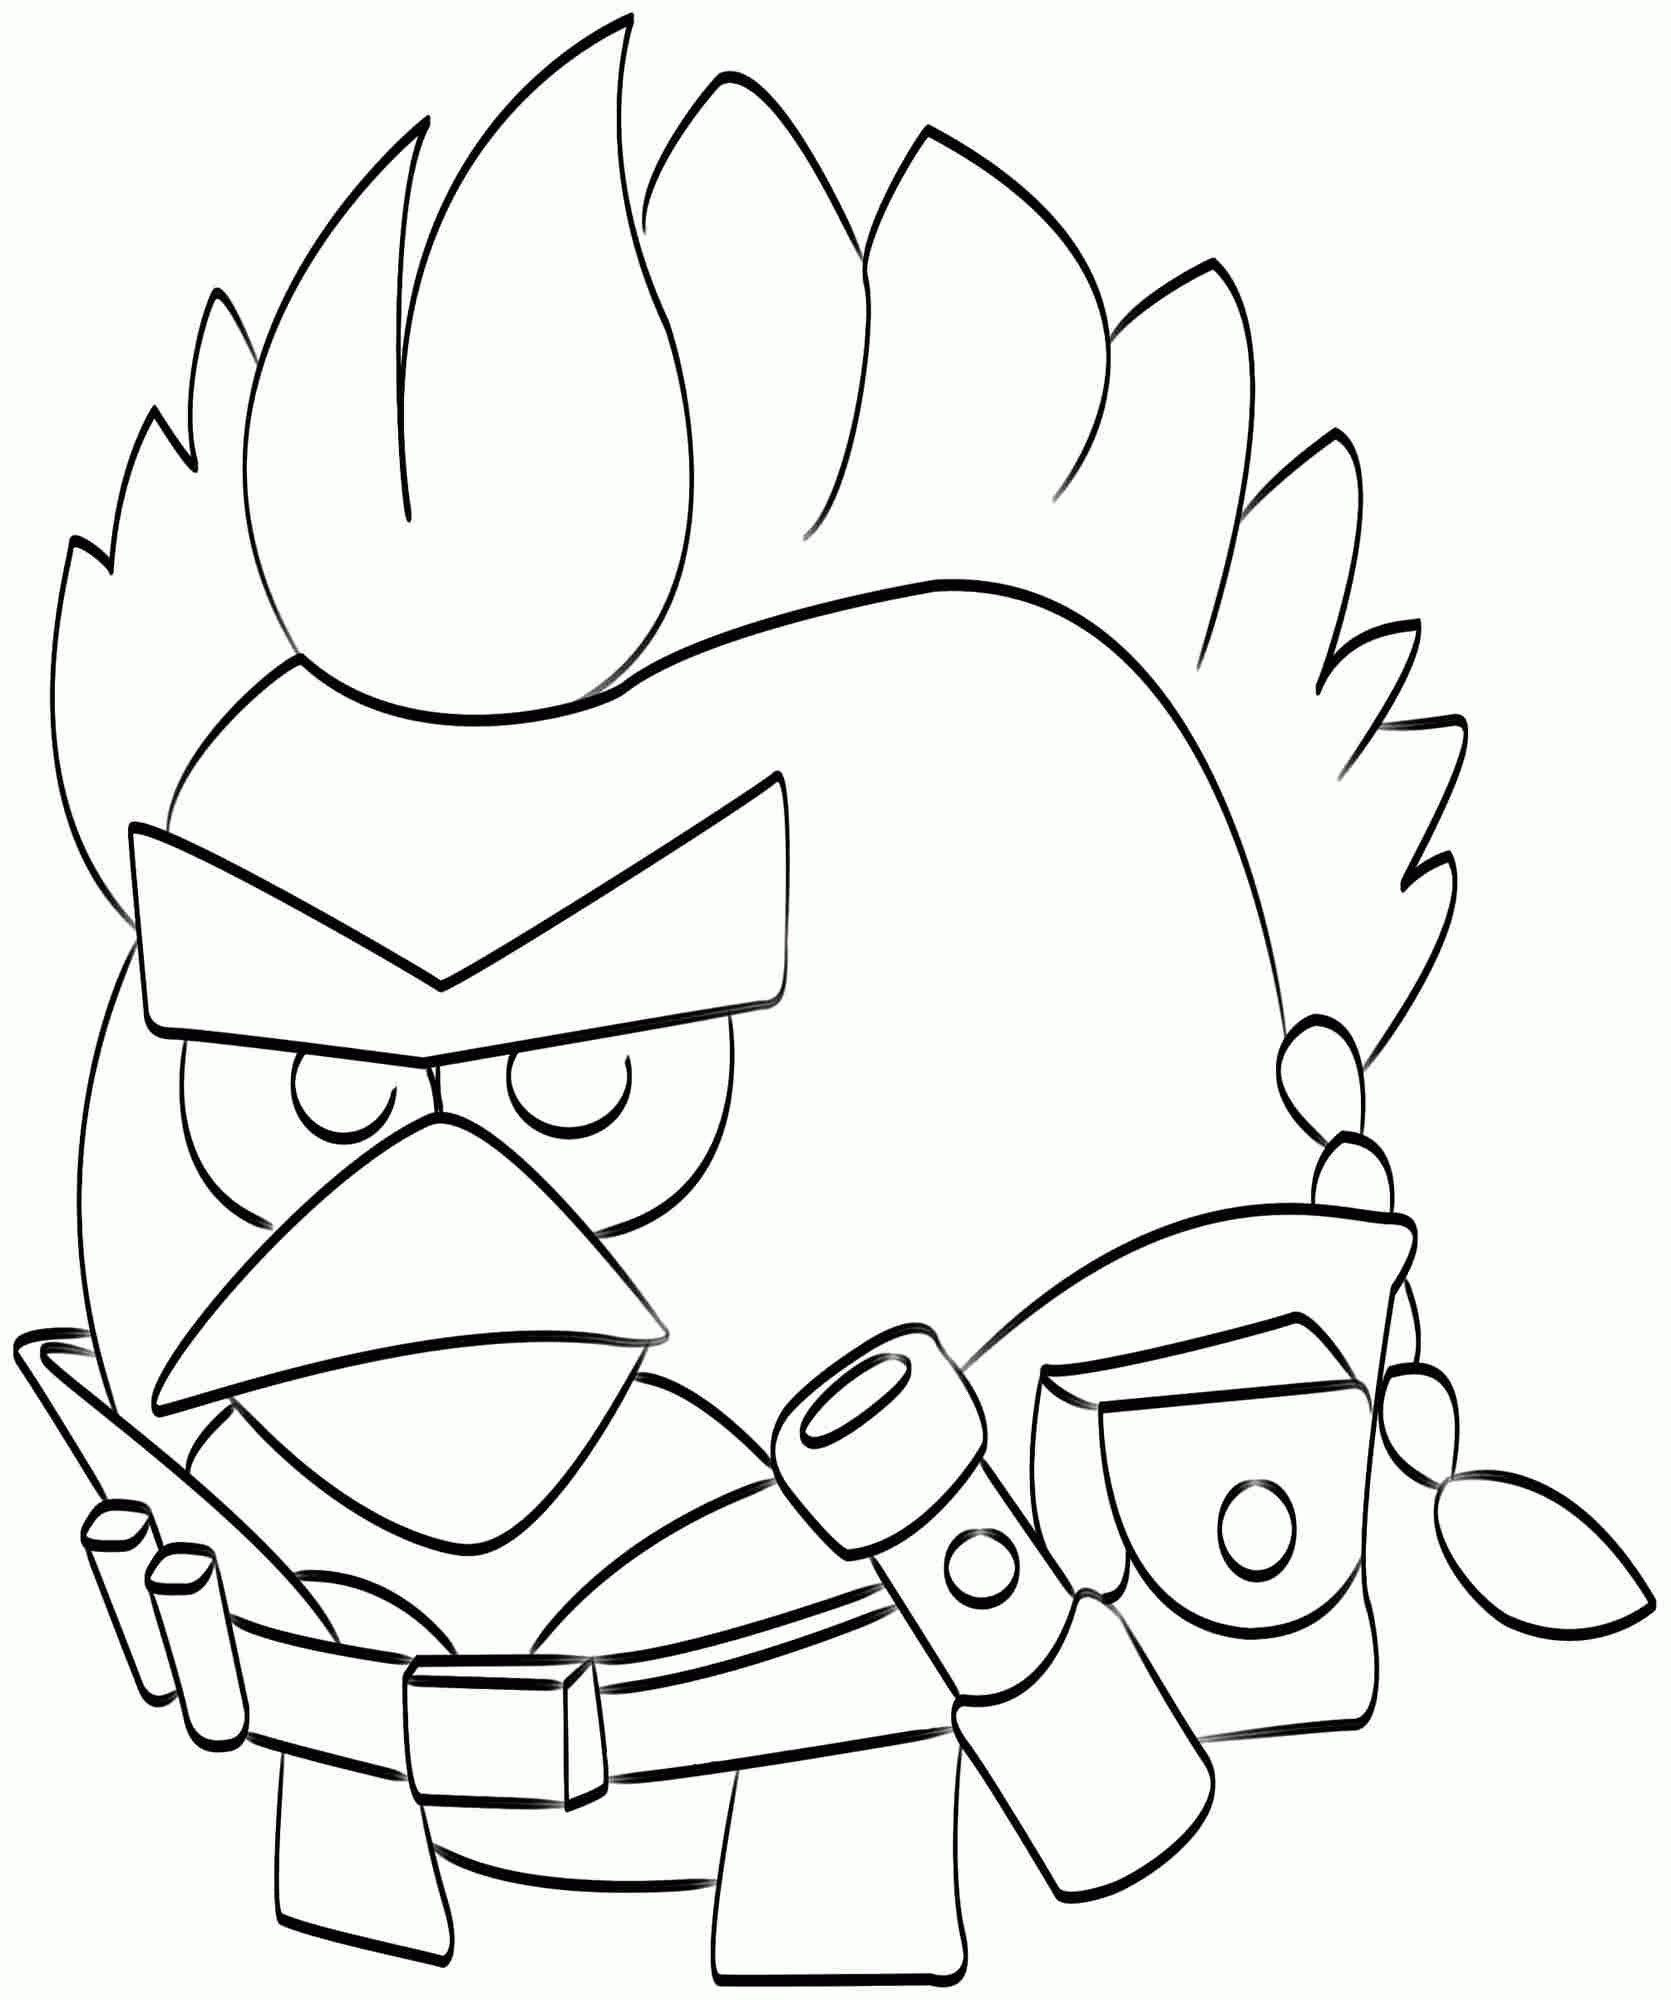 Free Printable Angry Birds Color Pages Nice - Coloring pages